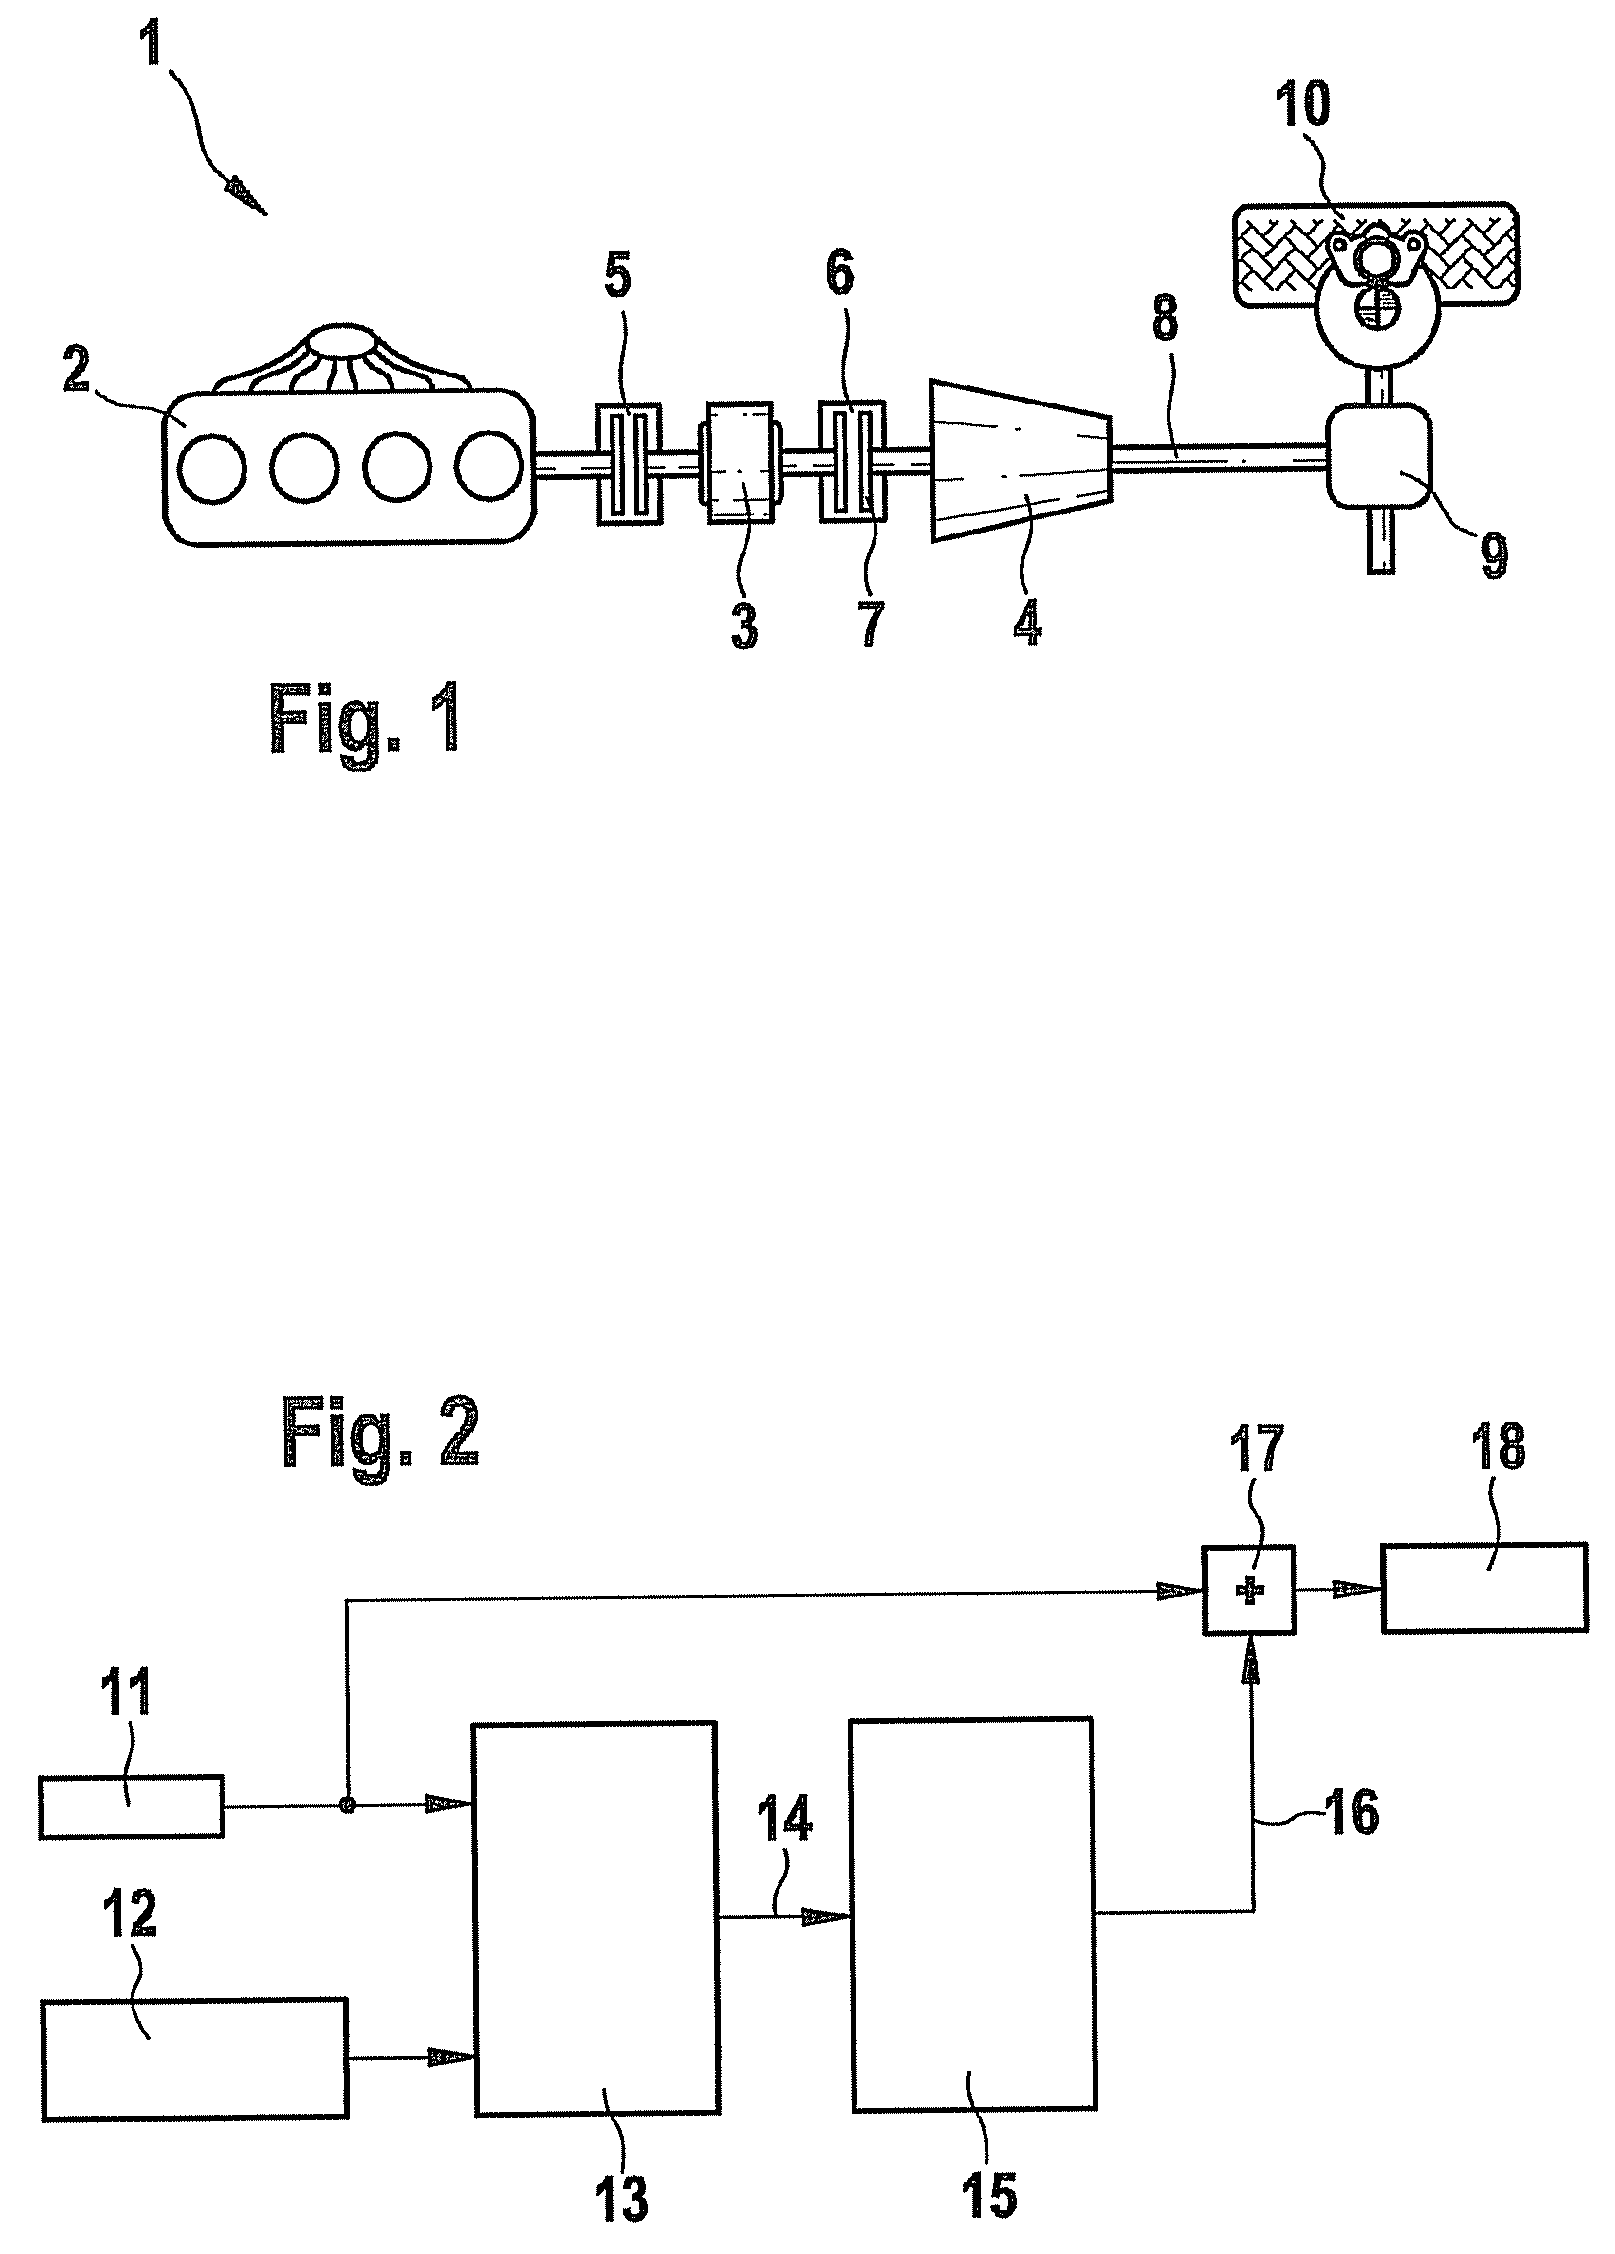 Method for operating a hybrid drive system having a torque converter